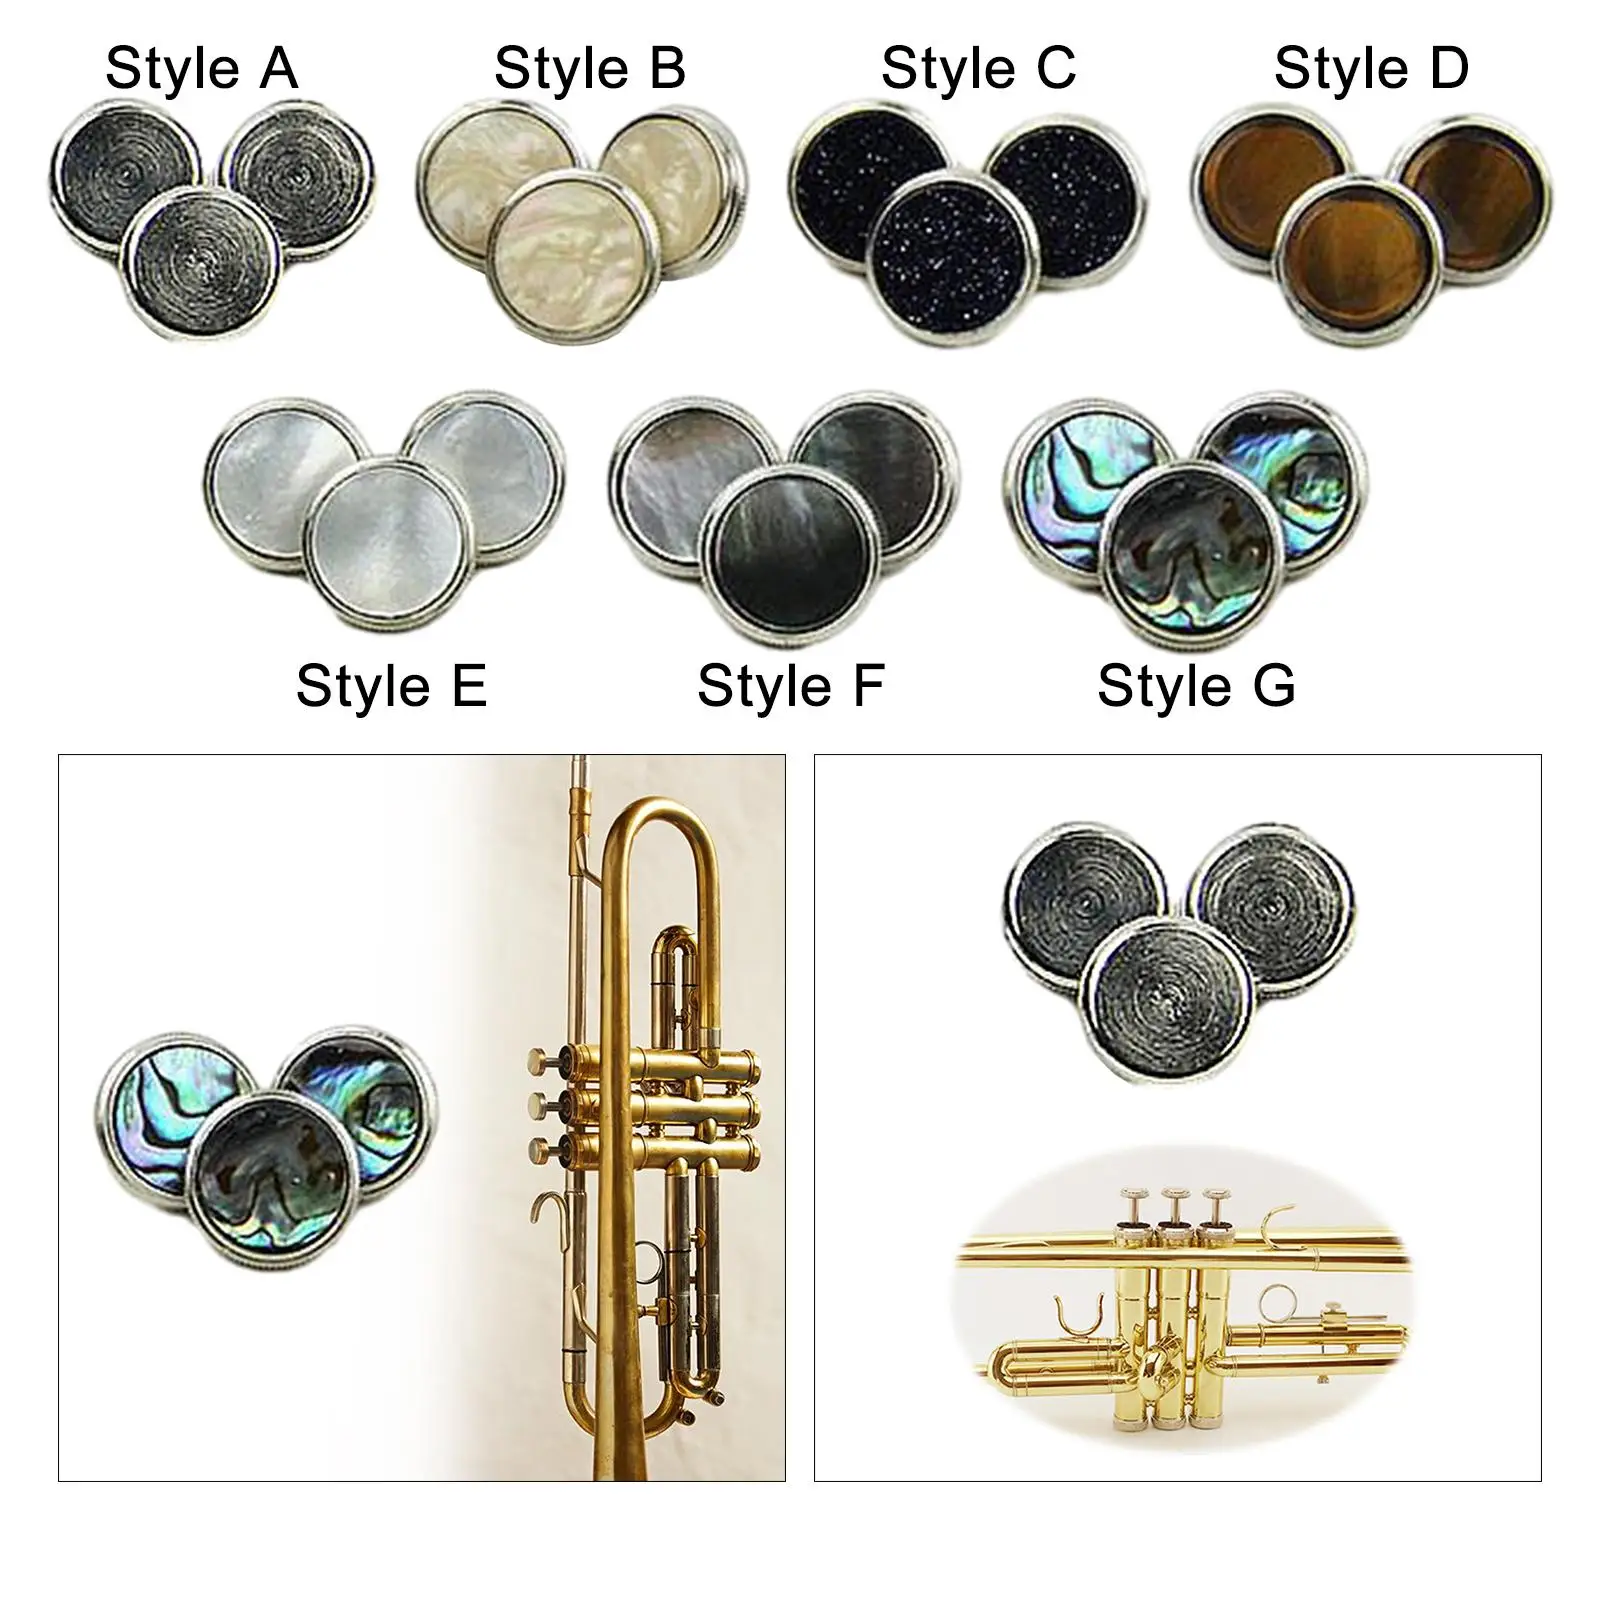 Trumpet Gig Knobs Replacement Key Parts Trumpet Gig Component Replacement Tools